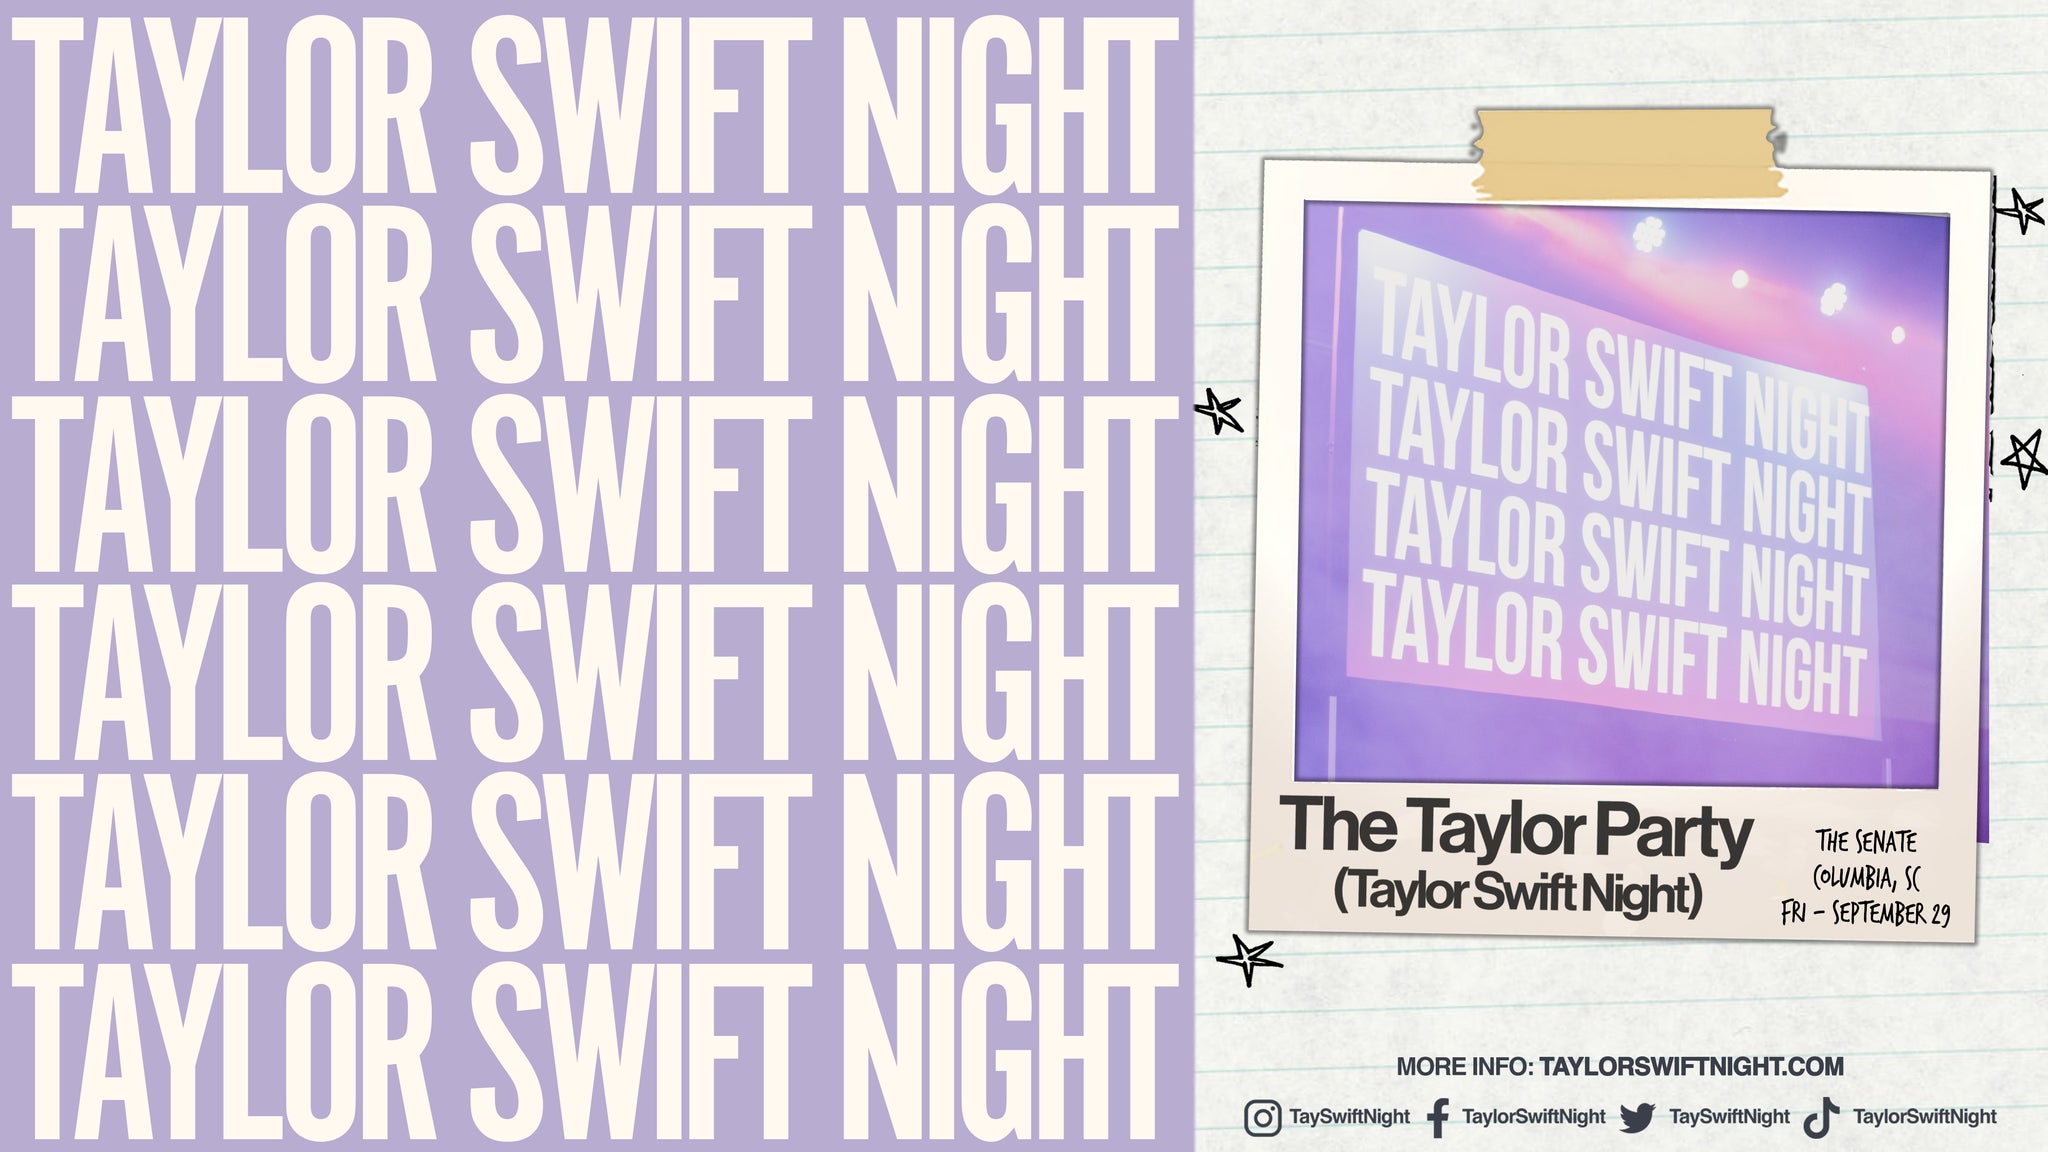 exclusive presale password for The Taylor Party: Taylor Swift Night (Eras Version)  18+ advanced tickets in Columbia at The Senate